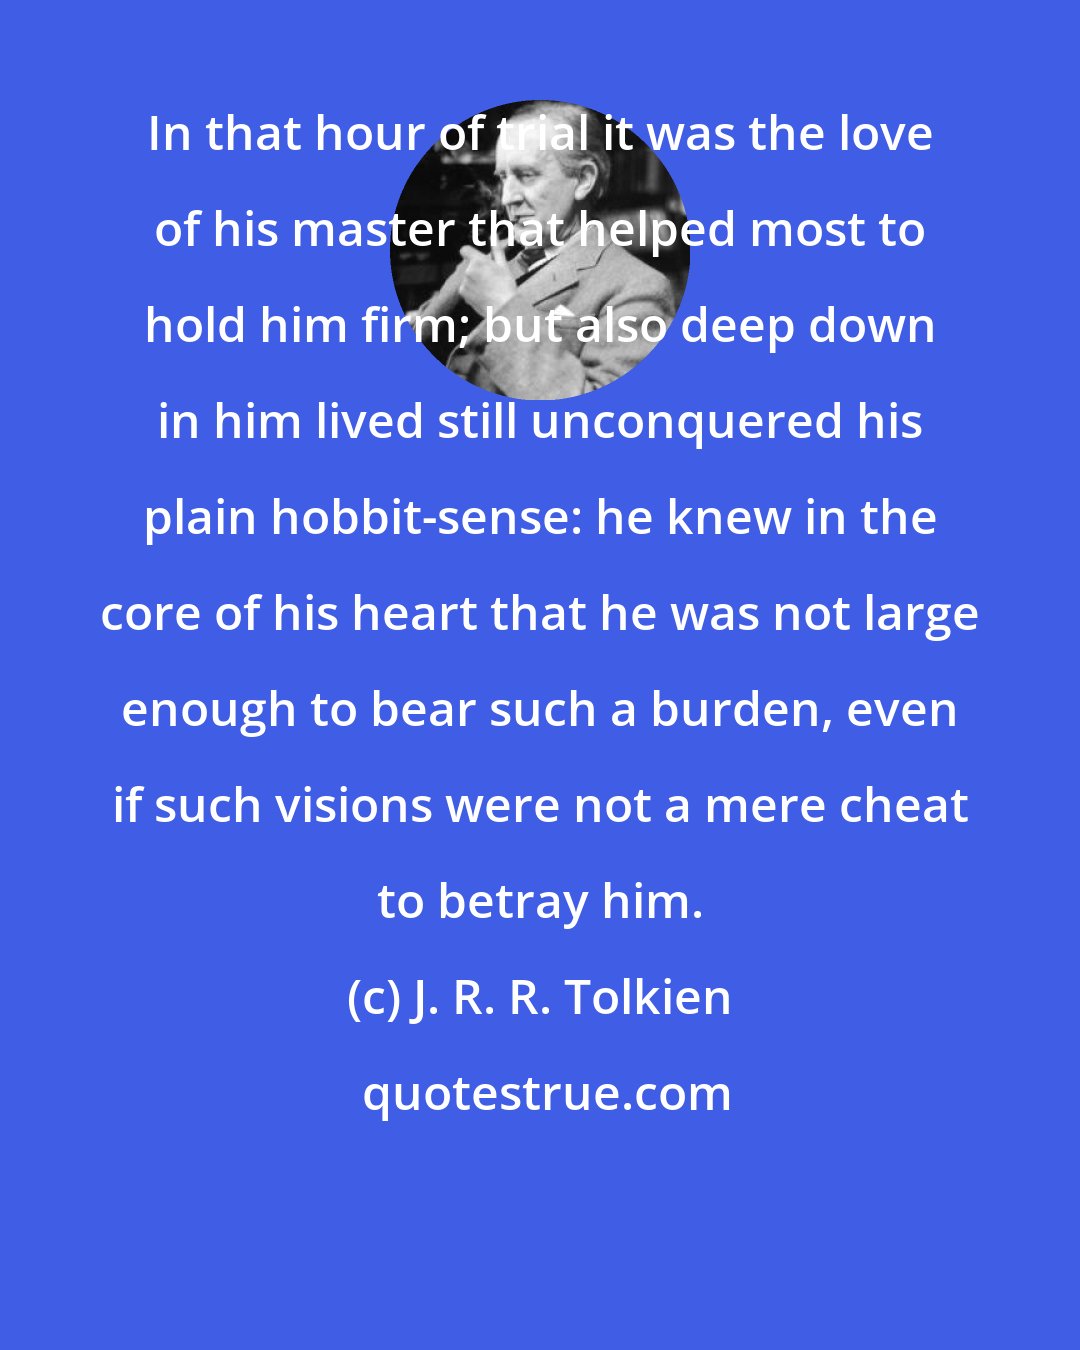 J. R. R. Tolkien: In that hour of trial it was the love of his master that helped most to hold him firm; but also deep down in him lived still unconquered his plain hobbit-sense: he knew in the core of his heart that he was not large enough to bear such a burden, even if such visions were not a mere cheat to betray him.